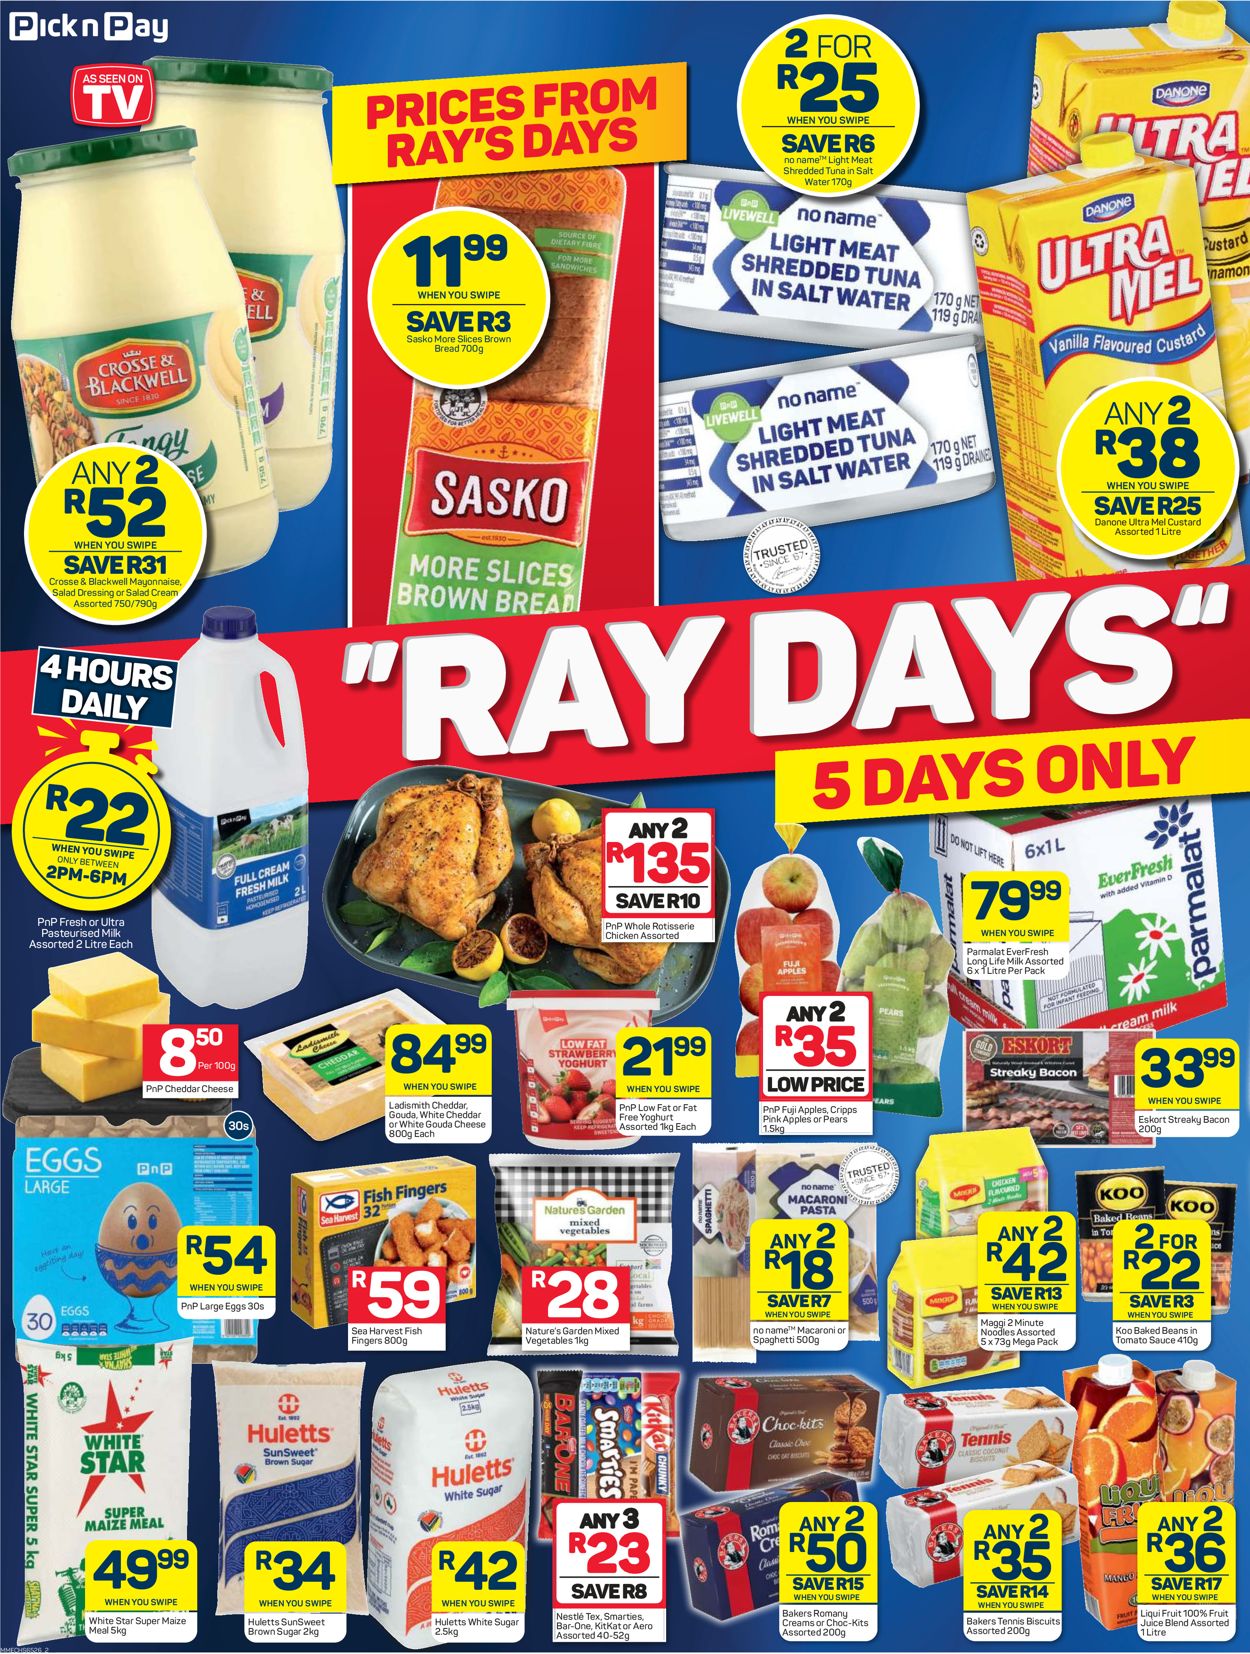 Pick n Pay Catalogue - 2022/06/15-2022/06/19 (Page 2)